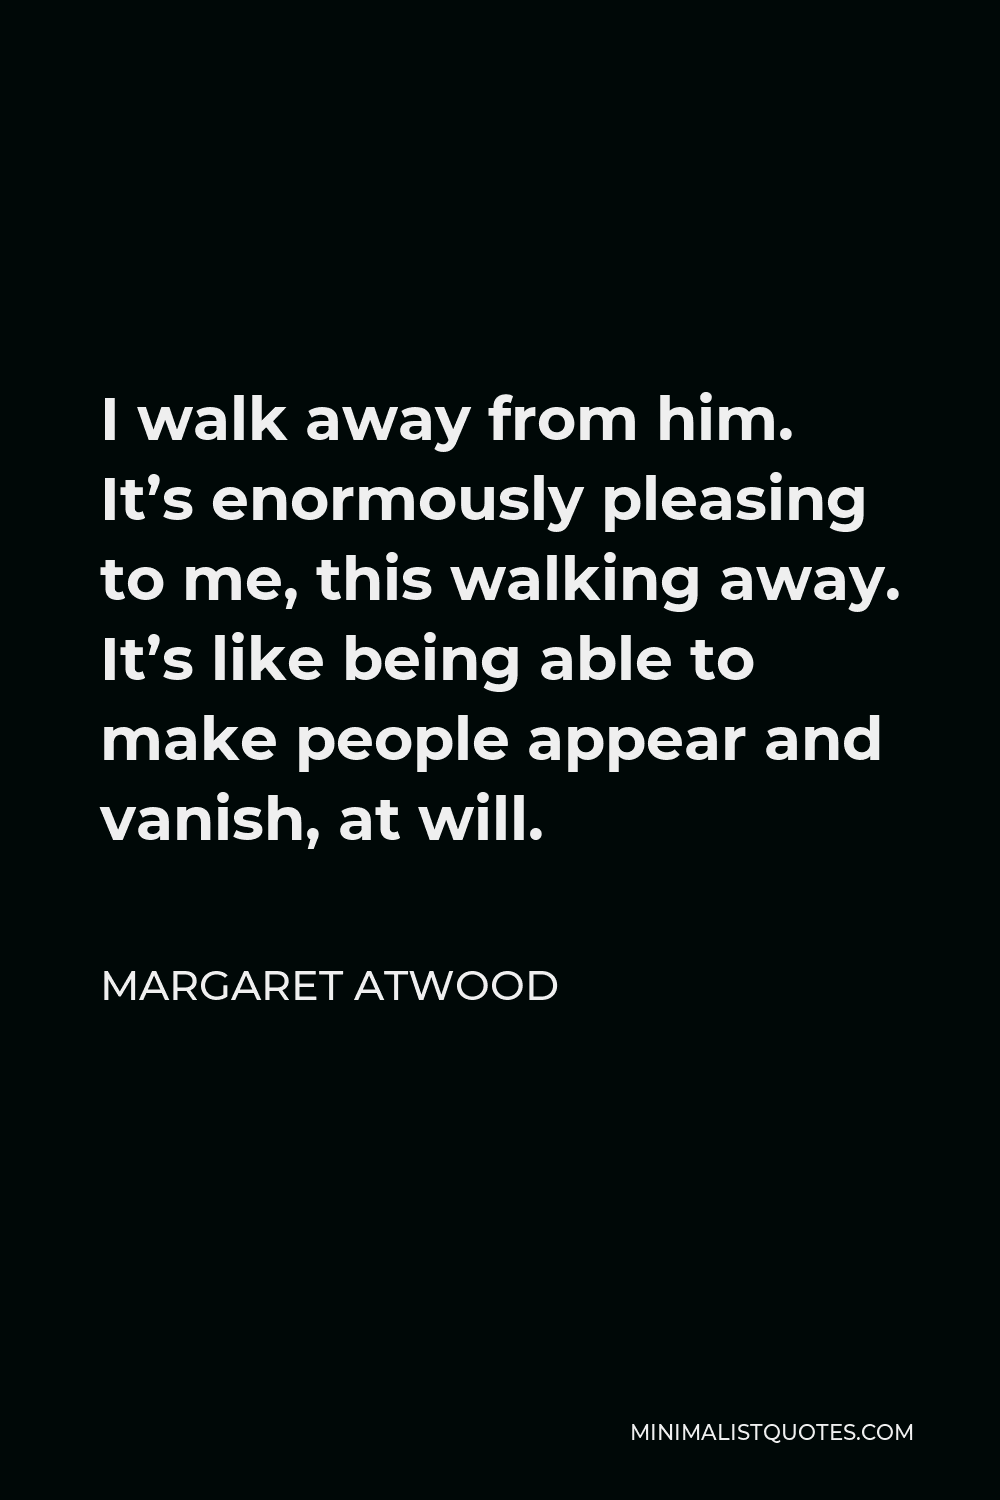 Margaret Atwood Quote: I walk away from him. It's enormously pleasing ...